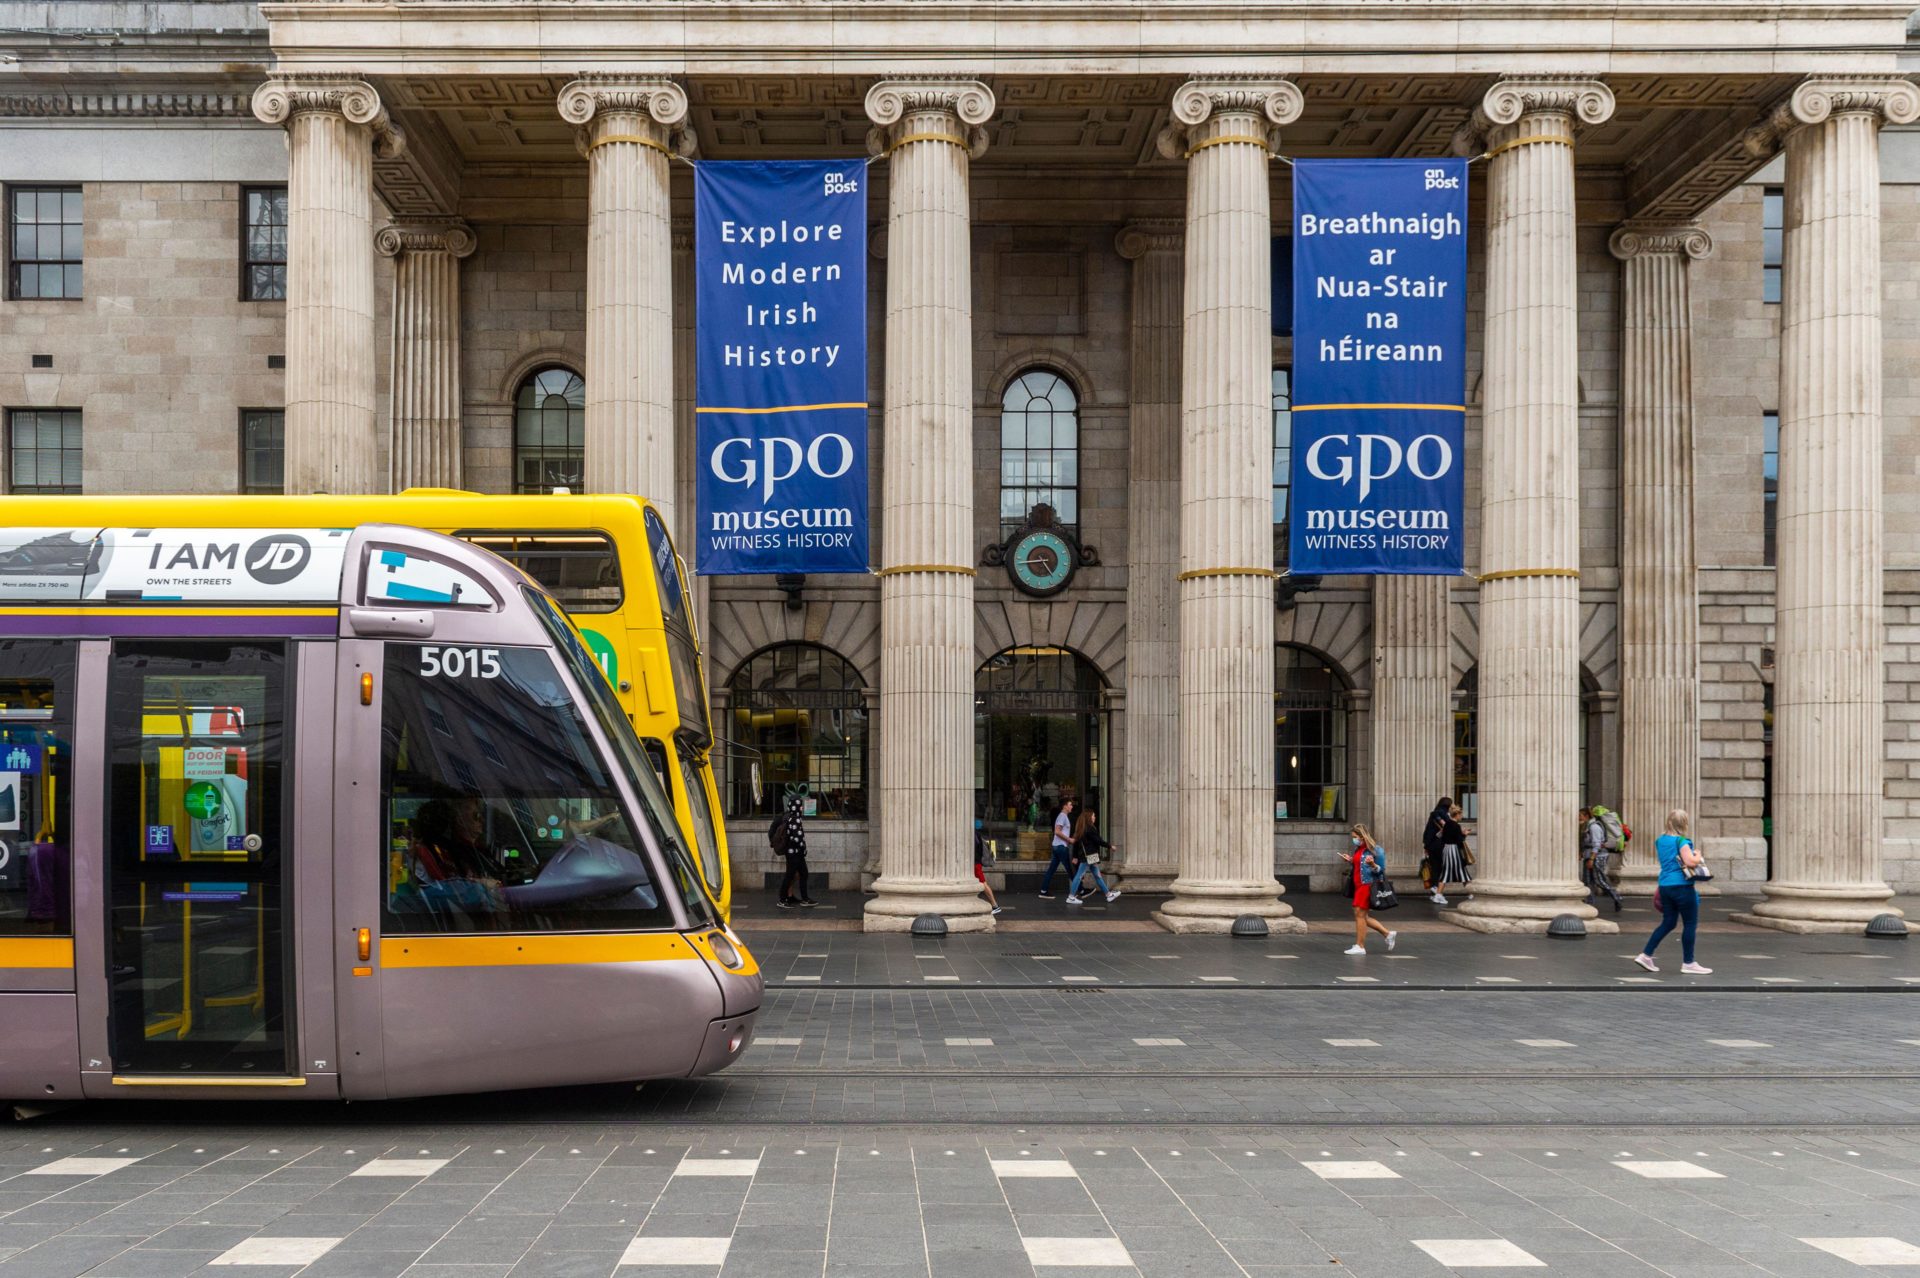 A Luas tram passes the GPO on Dublin's O'Connell Street in August 2020